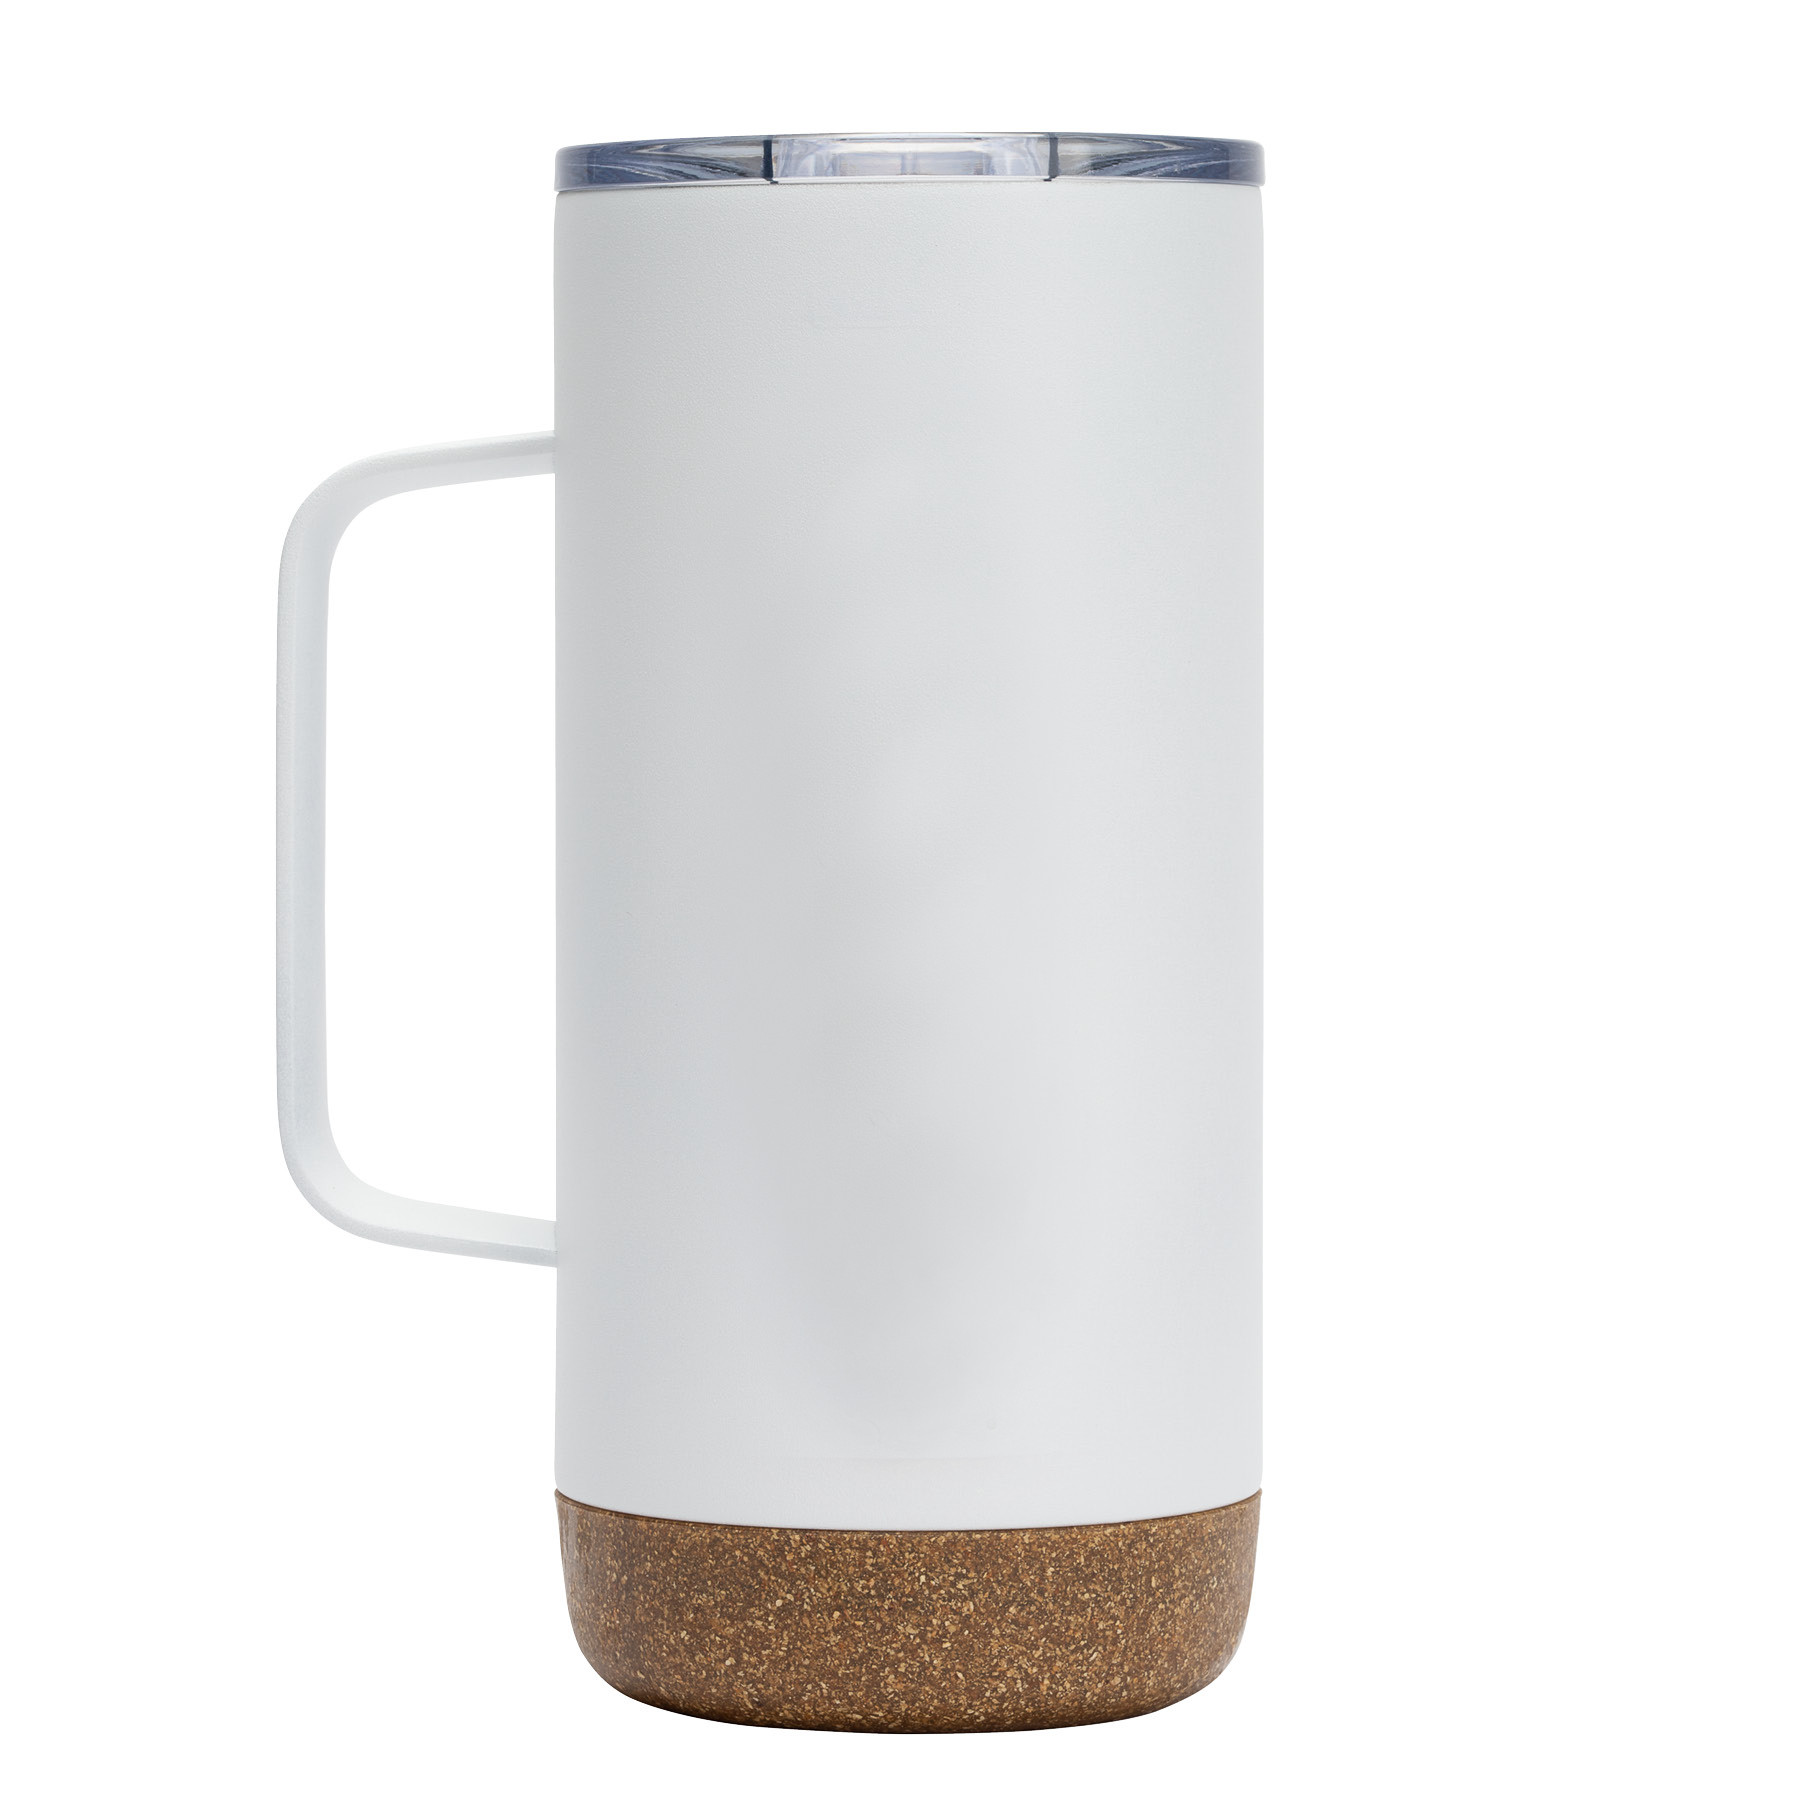 16 oz Hot & Cold Vacuum Seal Double Wall Stainless Steel Mug with